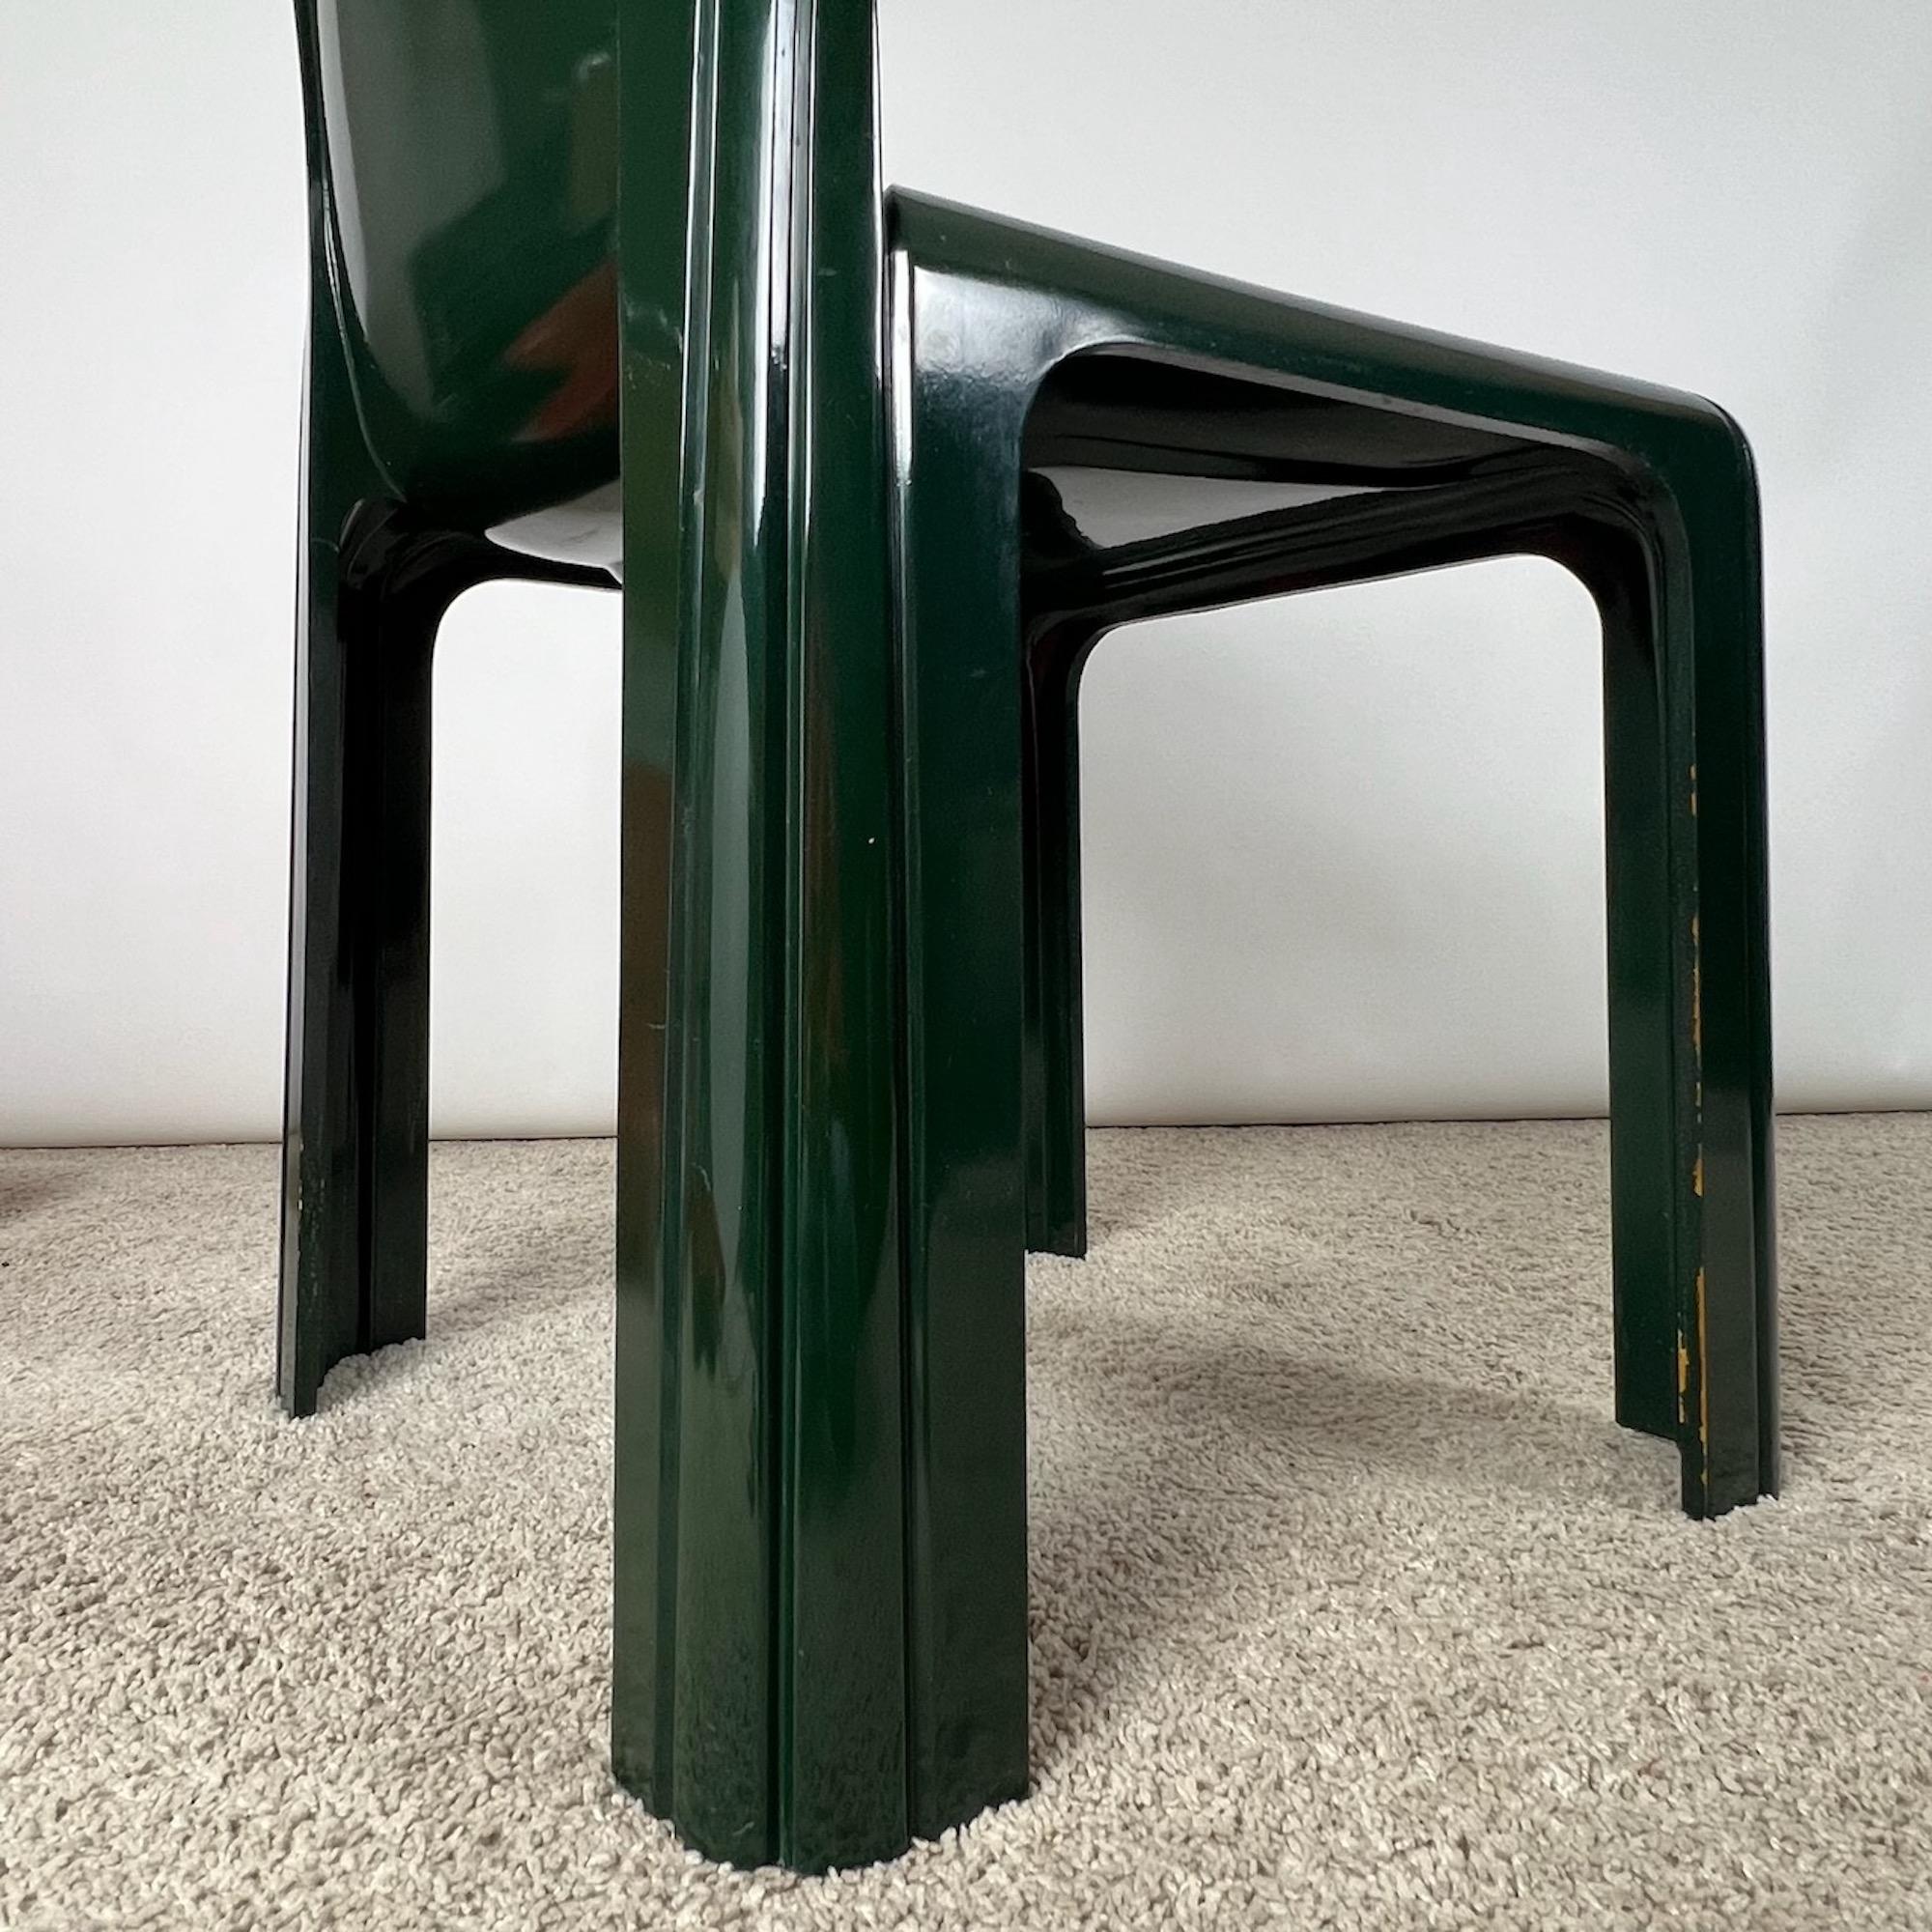 Kartell Model 4854 Chairs by Gae Aulenti, 1960s - Set of 4 - Emerald Green Resin In Good Condition For Sale In San Benedetto Del Tronto, IT